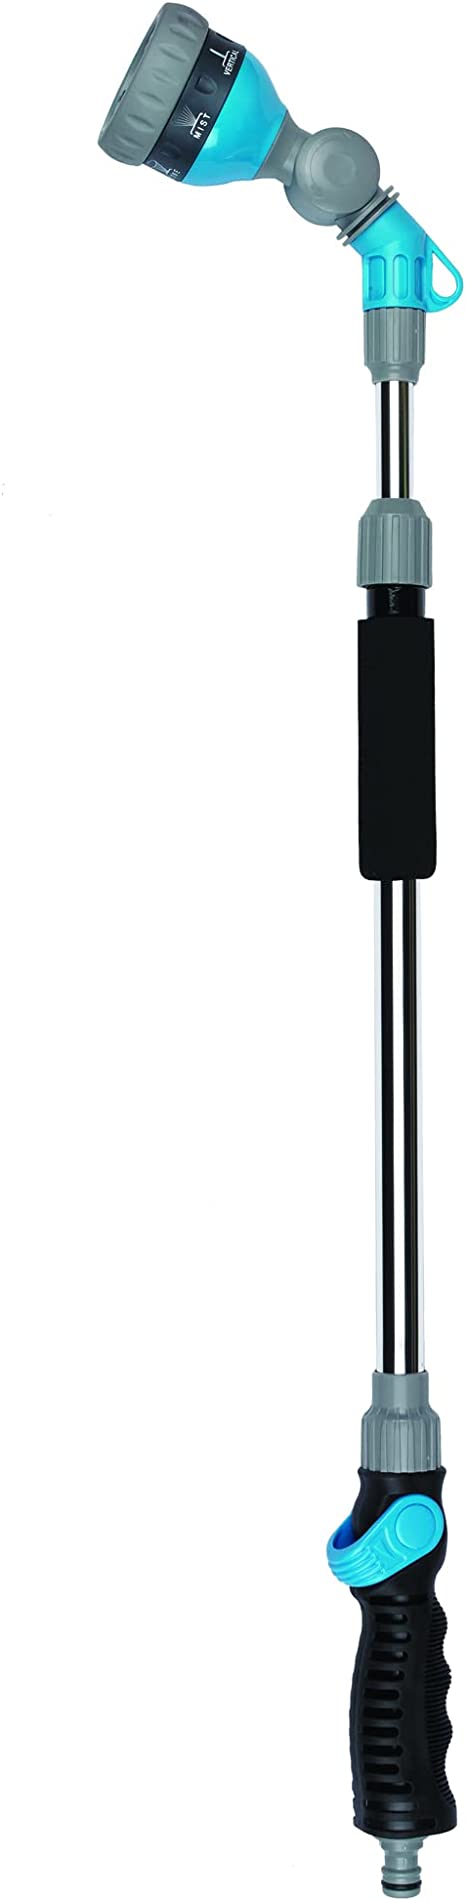 Flopro Telescopic Watering Lance with Adjustable Head